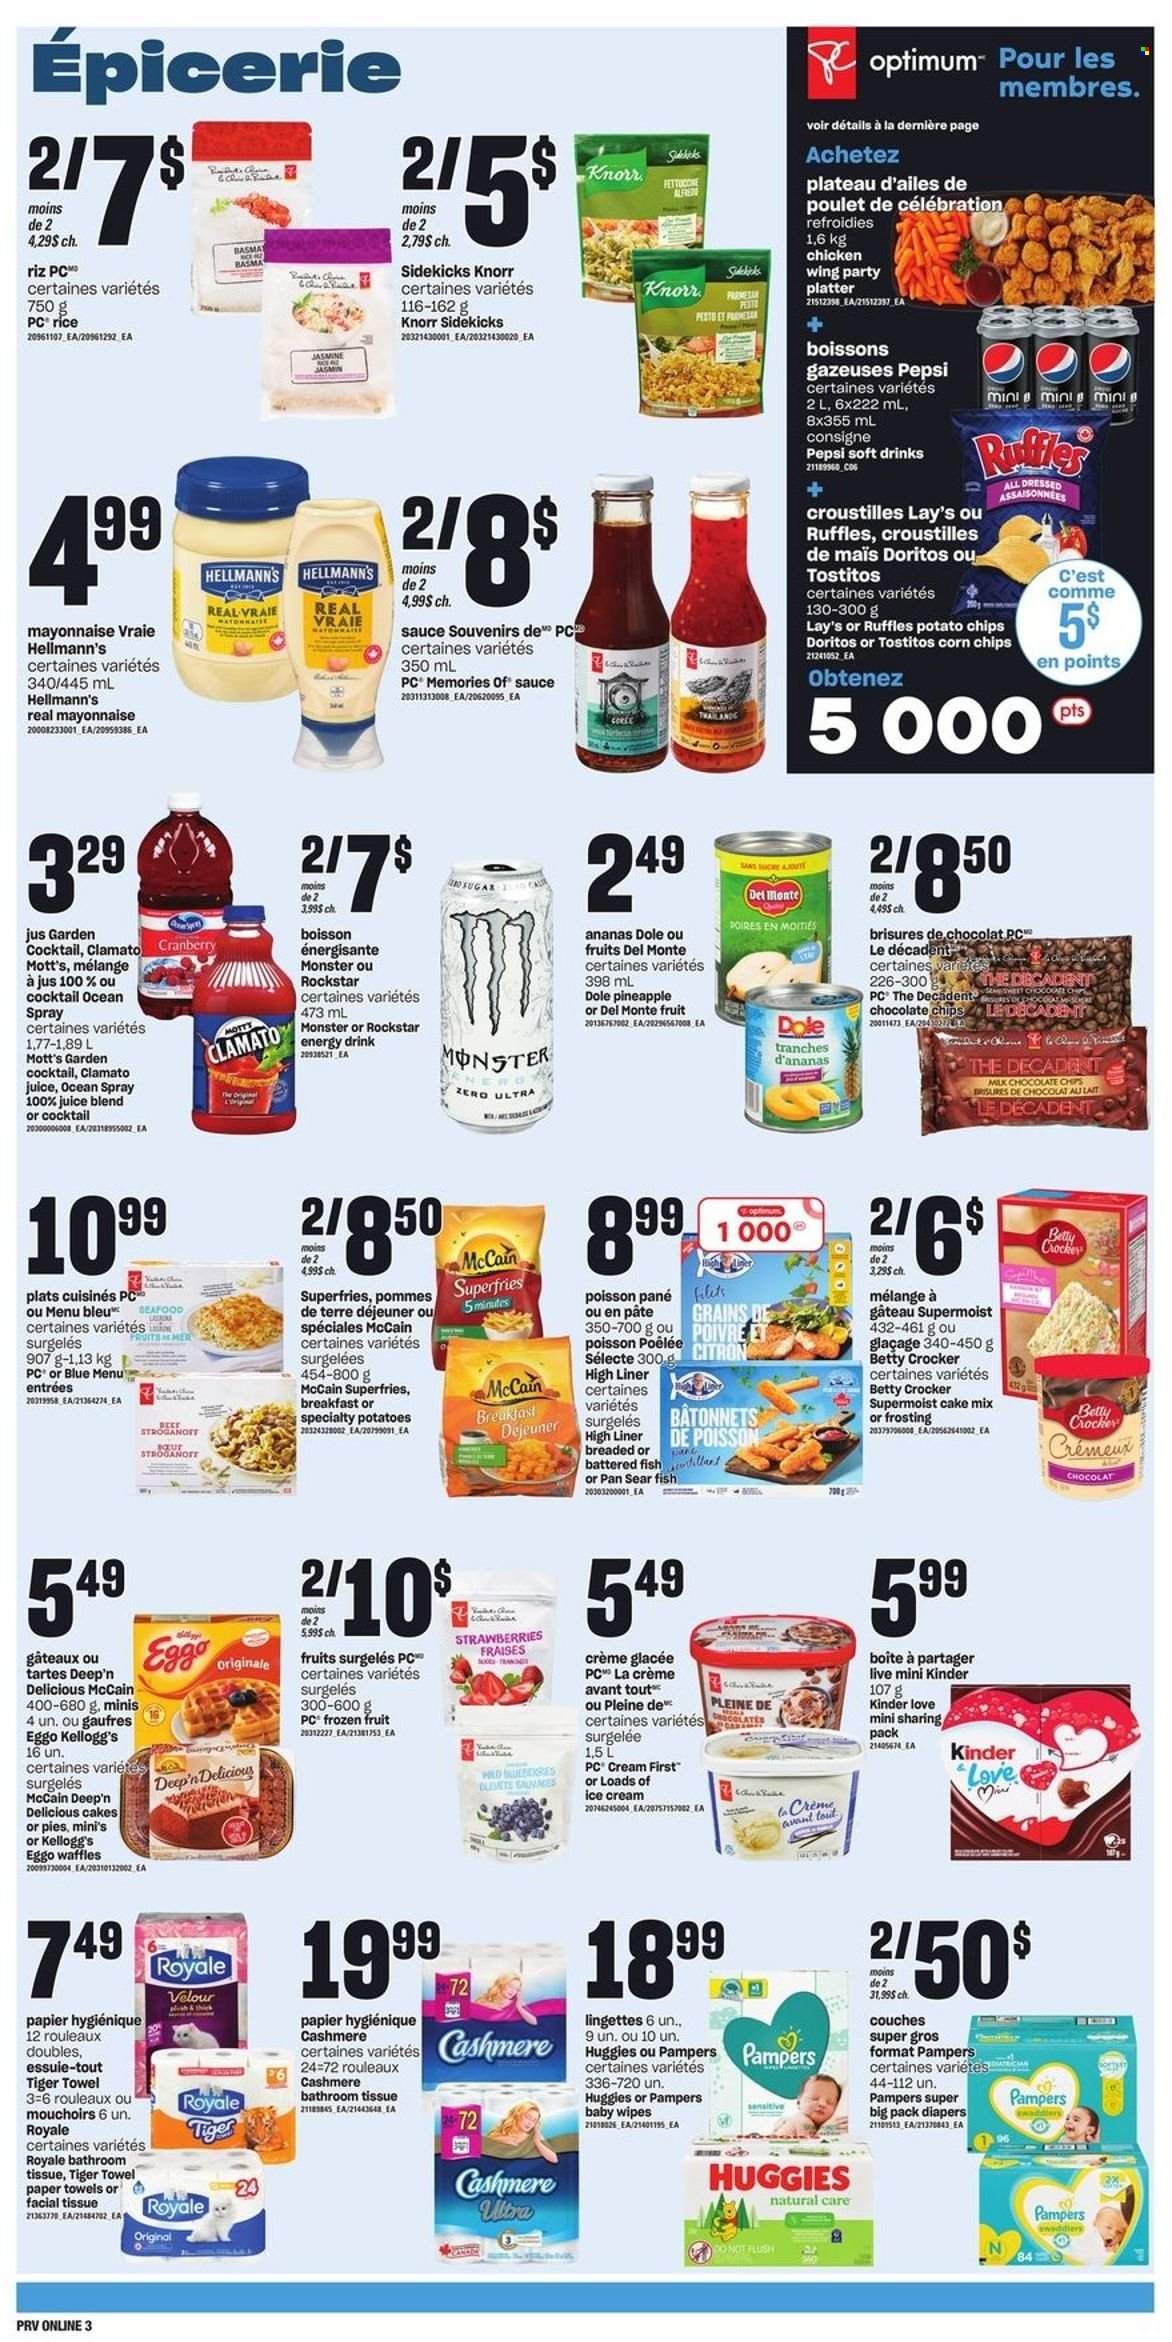 thumbnail - Provigo Flyer - February 02, 2023 - February 08, 2023 - Sales products - waffles, cake mix, Dole, blueberries, strawberries, Mott's, seafood, fish, sauce, parmesan, mayonnaise, Hellmann’s, ice cream, McCain, potato fries, milk chocolate, Celebration, Kellogg's, Doritos, potato chips, Lay’s, corn chips, Ruffles, Tostitos, frosting, sugar, Del Monte, rice, Pepsi, juice, energy drink, Monster, Clamato, soft drink, Rockstar, wipes, Pampers, baby wipes, nappies, bath tissue, kitchen towels, paper towels, Optimum, Huggies, pesto, Knorr. Page 9.